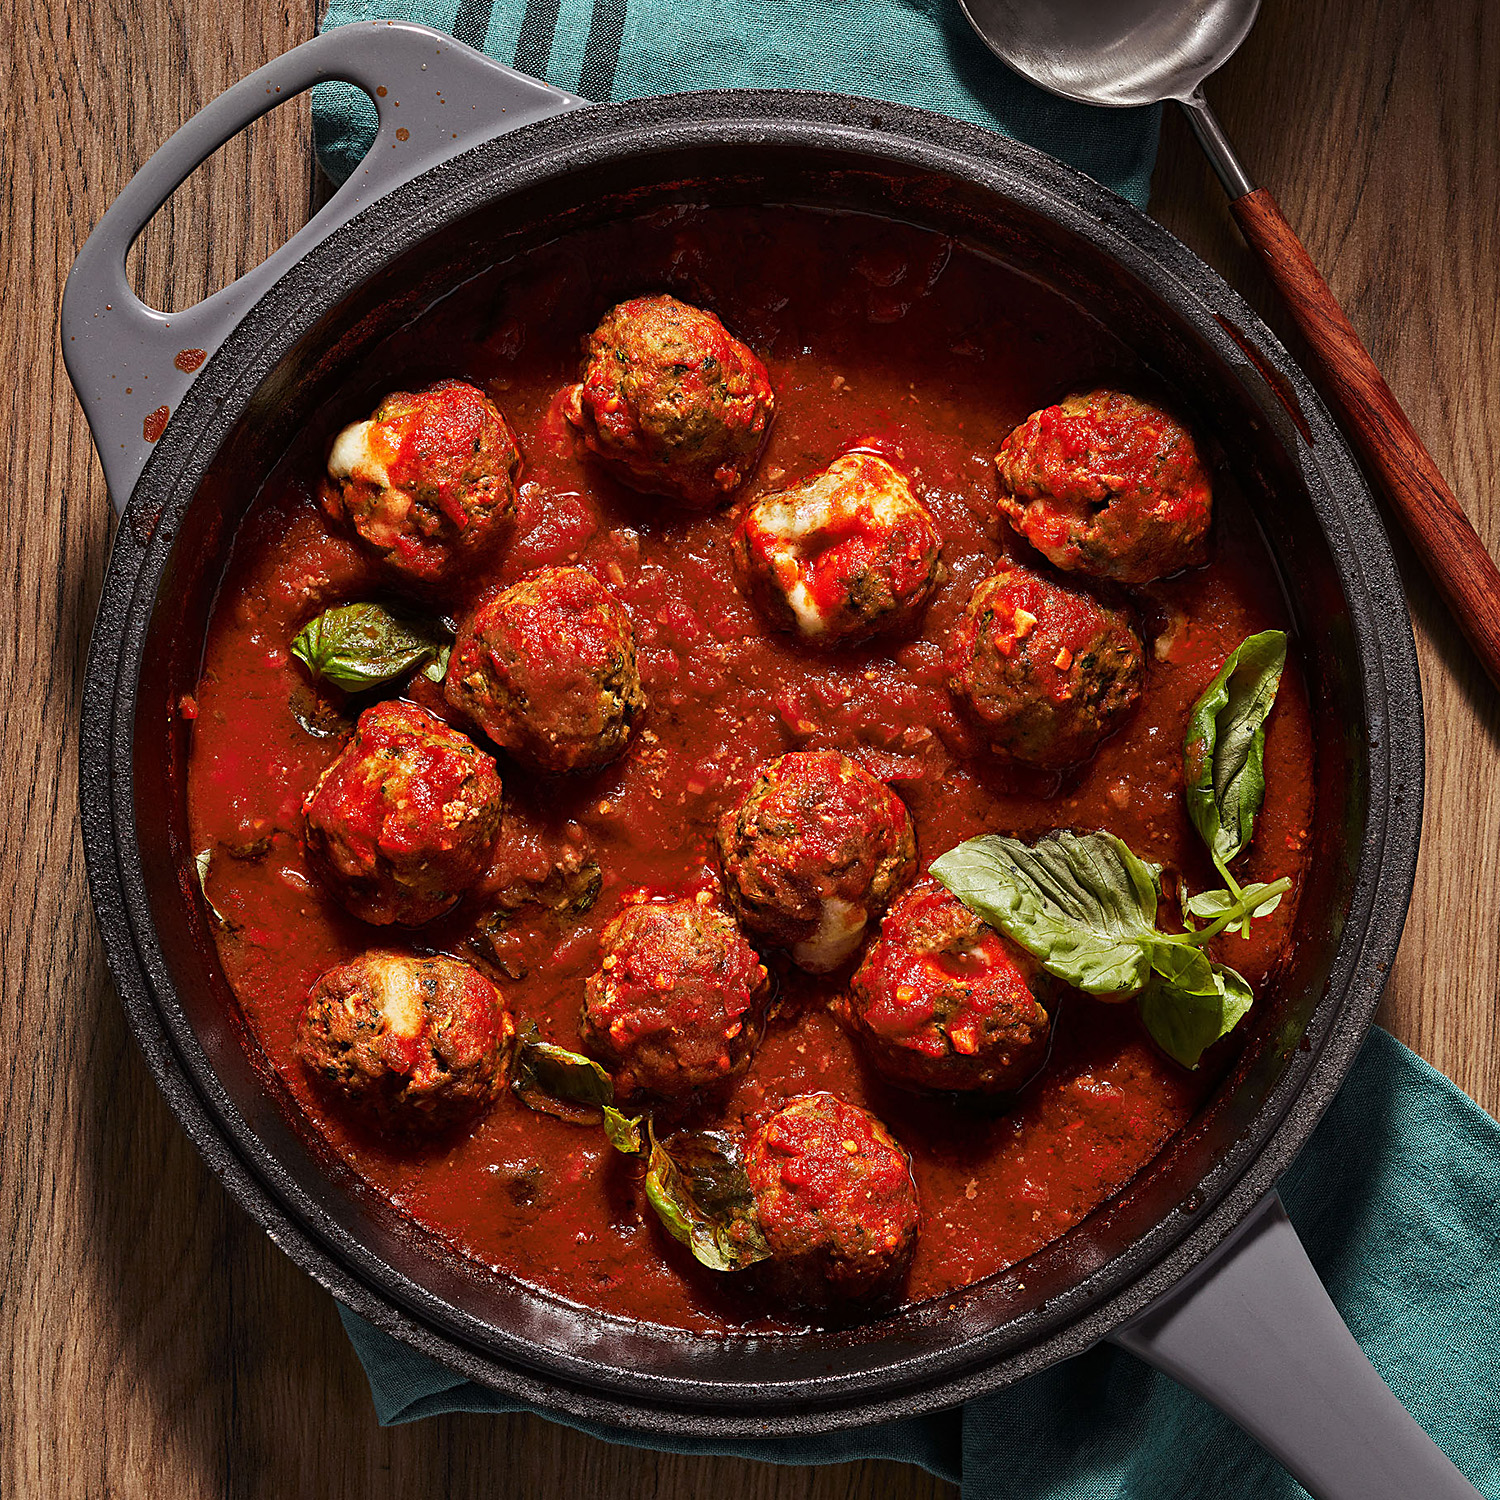 Rachael Ray's Provolone-Stuffed Meatballs with Kale 